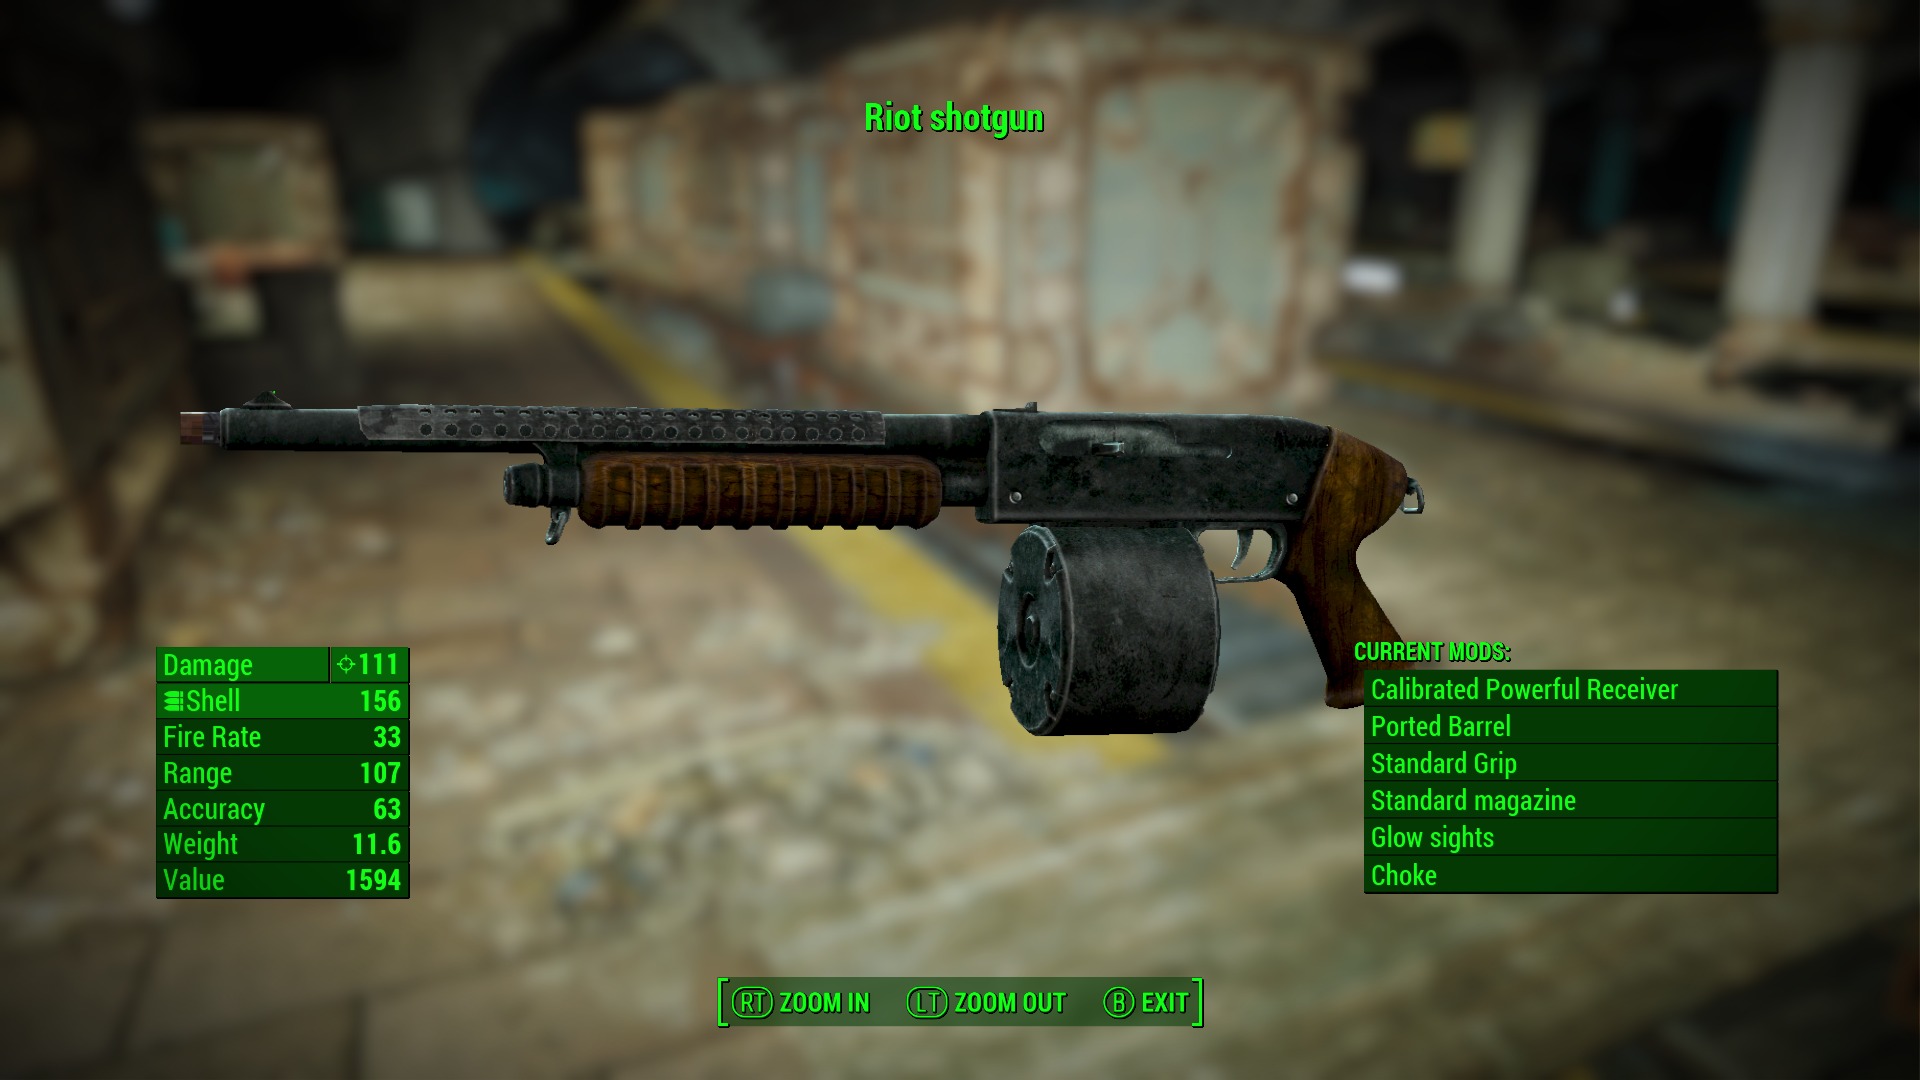 Targeted Redux New Vegas Weapons Retextures Bug Fixes And Leveled Lists 武器 Fallout4 Mod データベース Mod紹介 まとめサイト